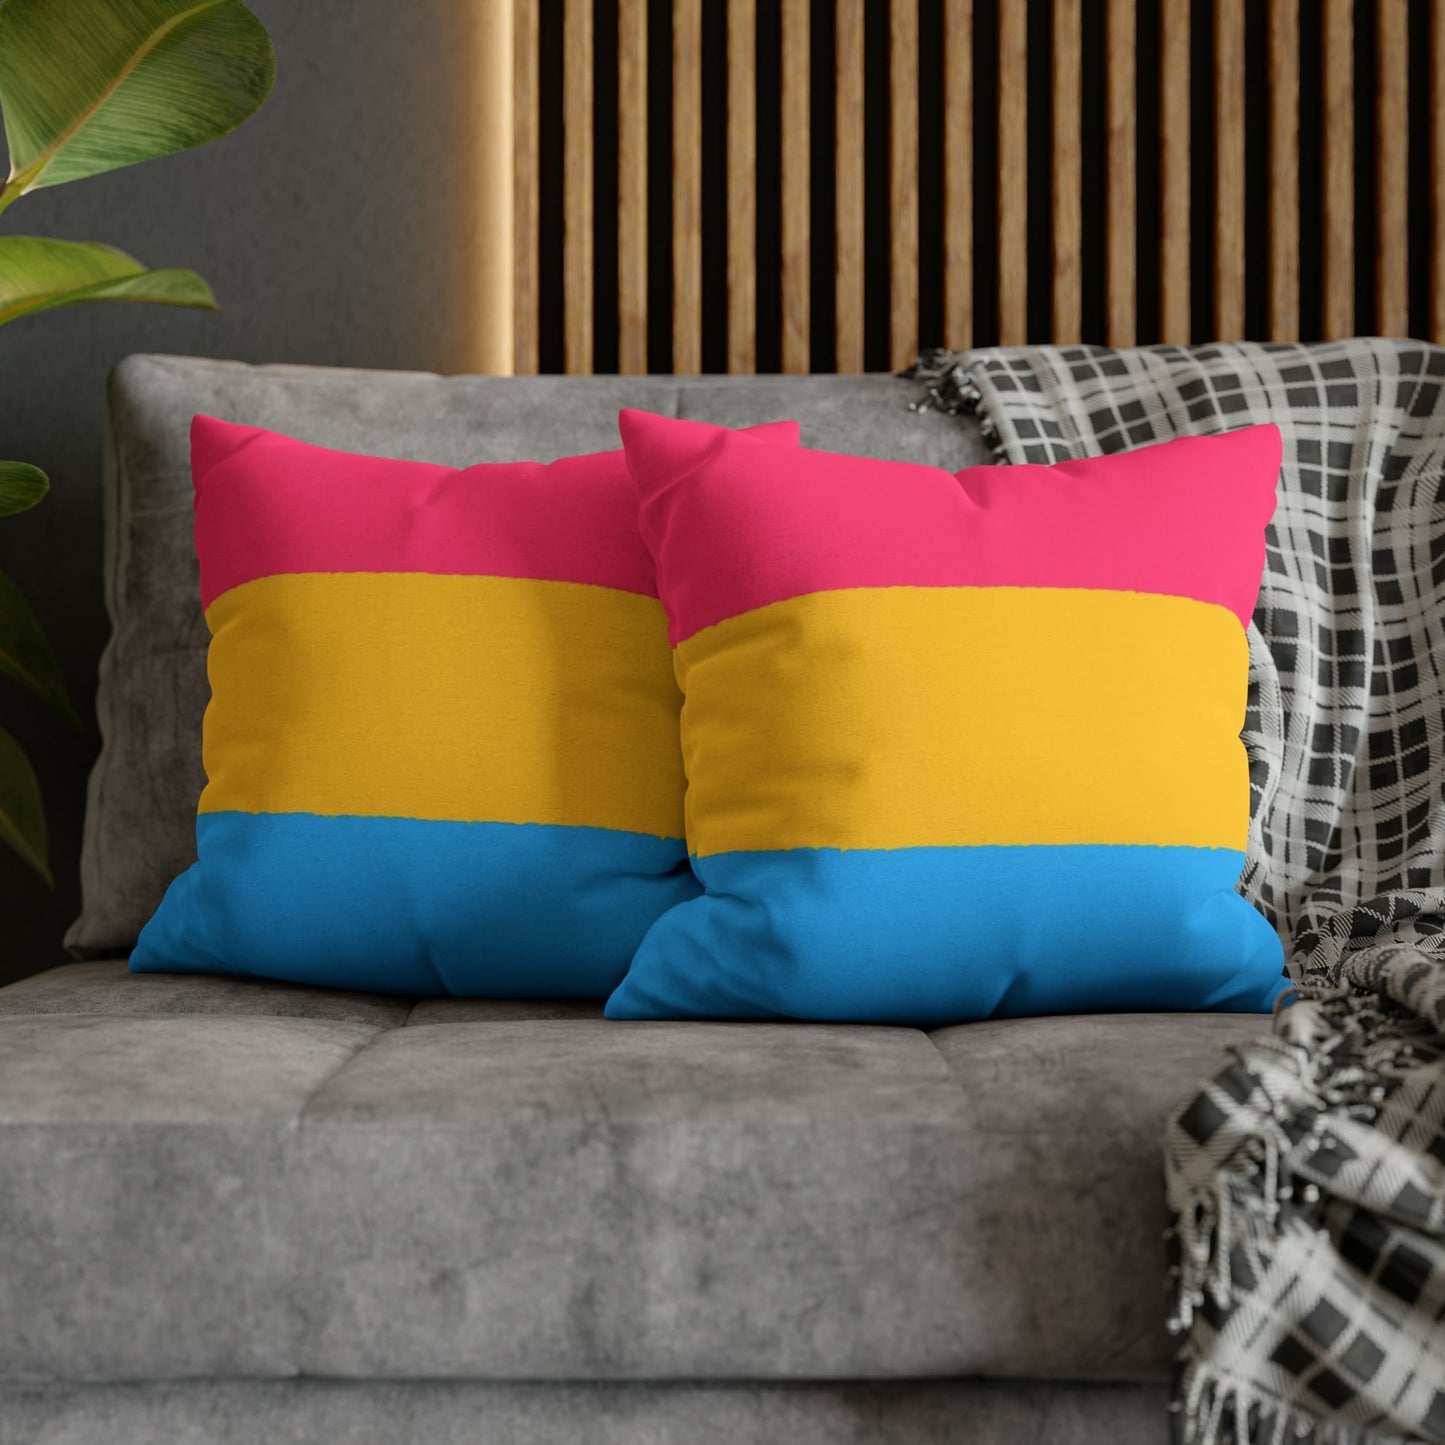 2 pansexual pillows on couch